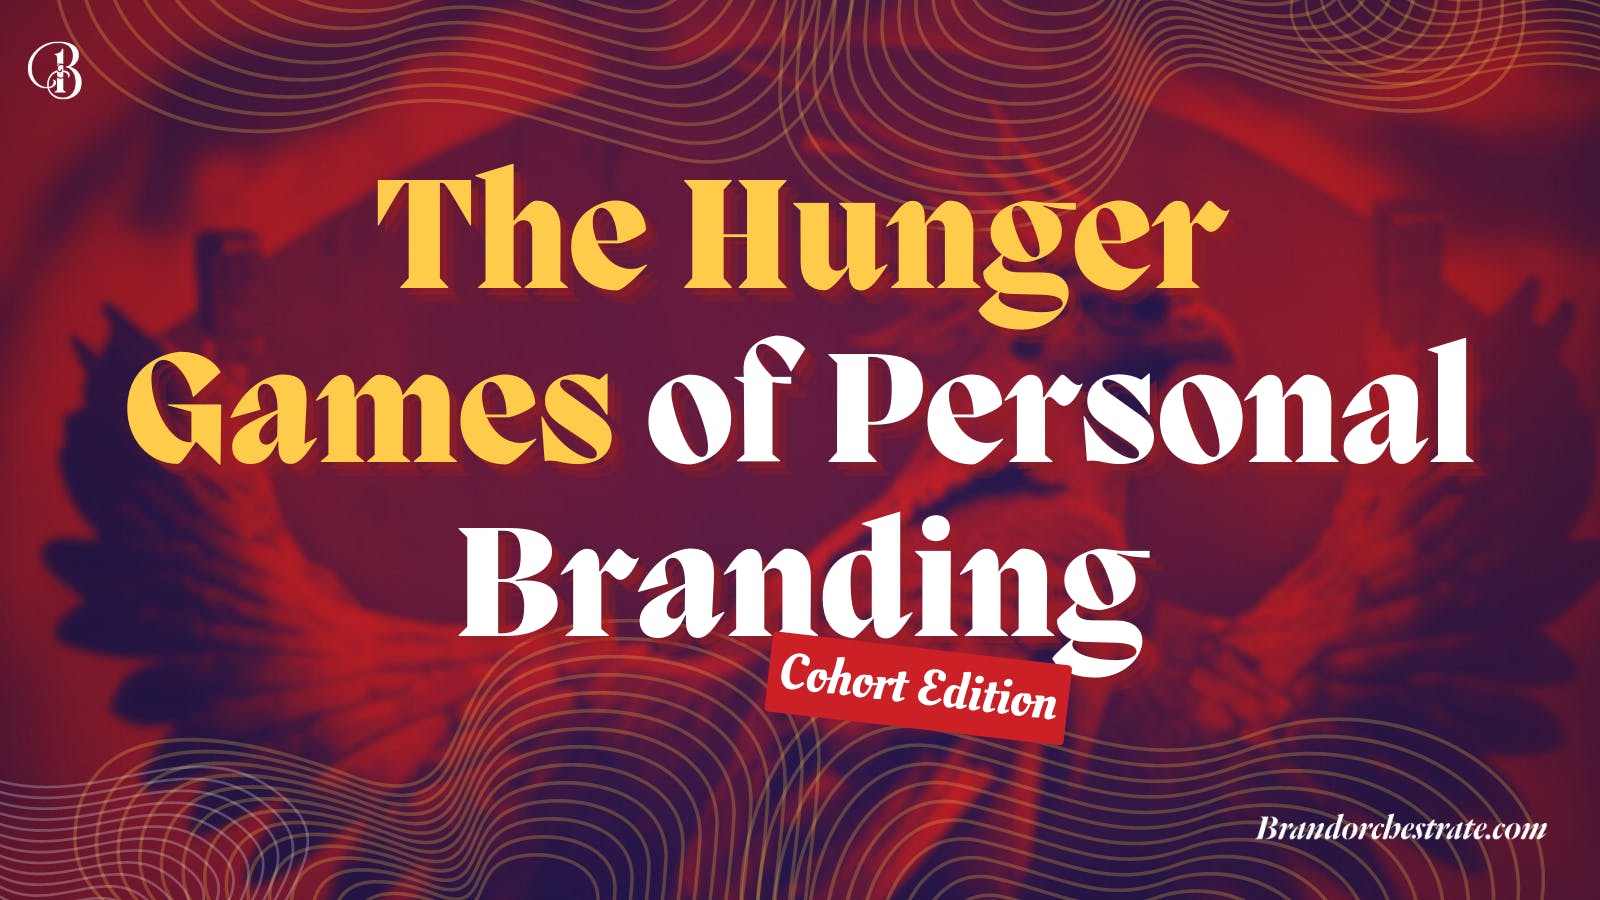 The Hunger Games of Personal Branding